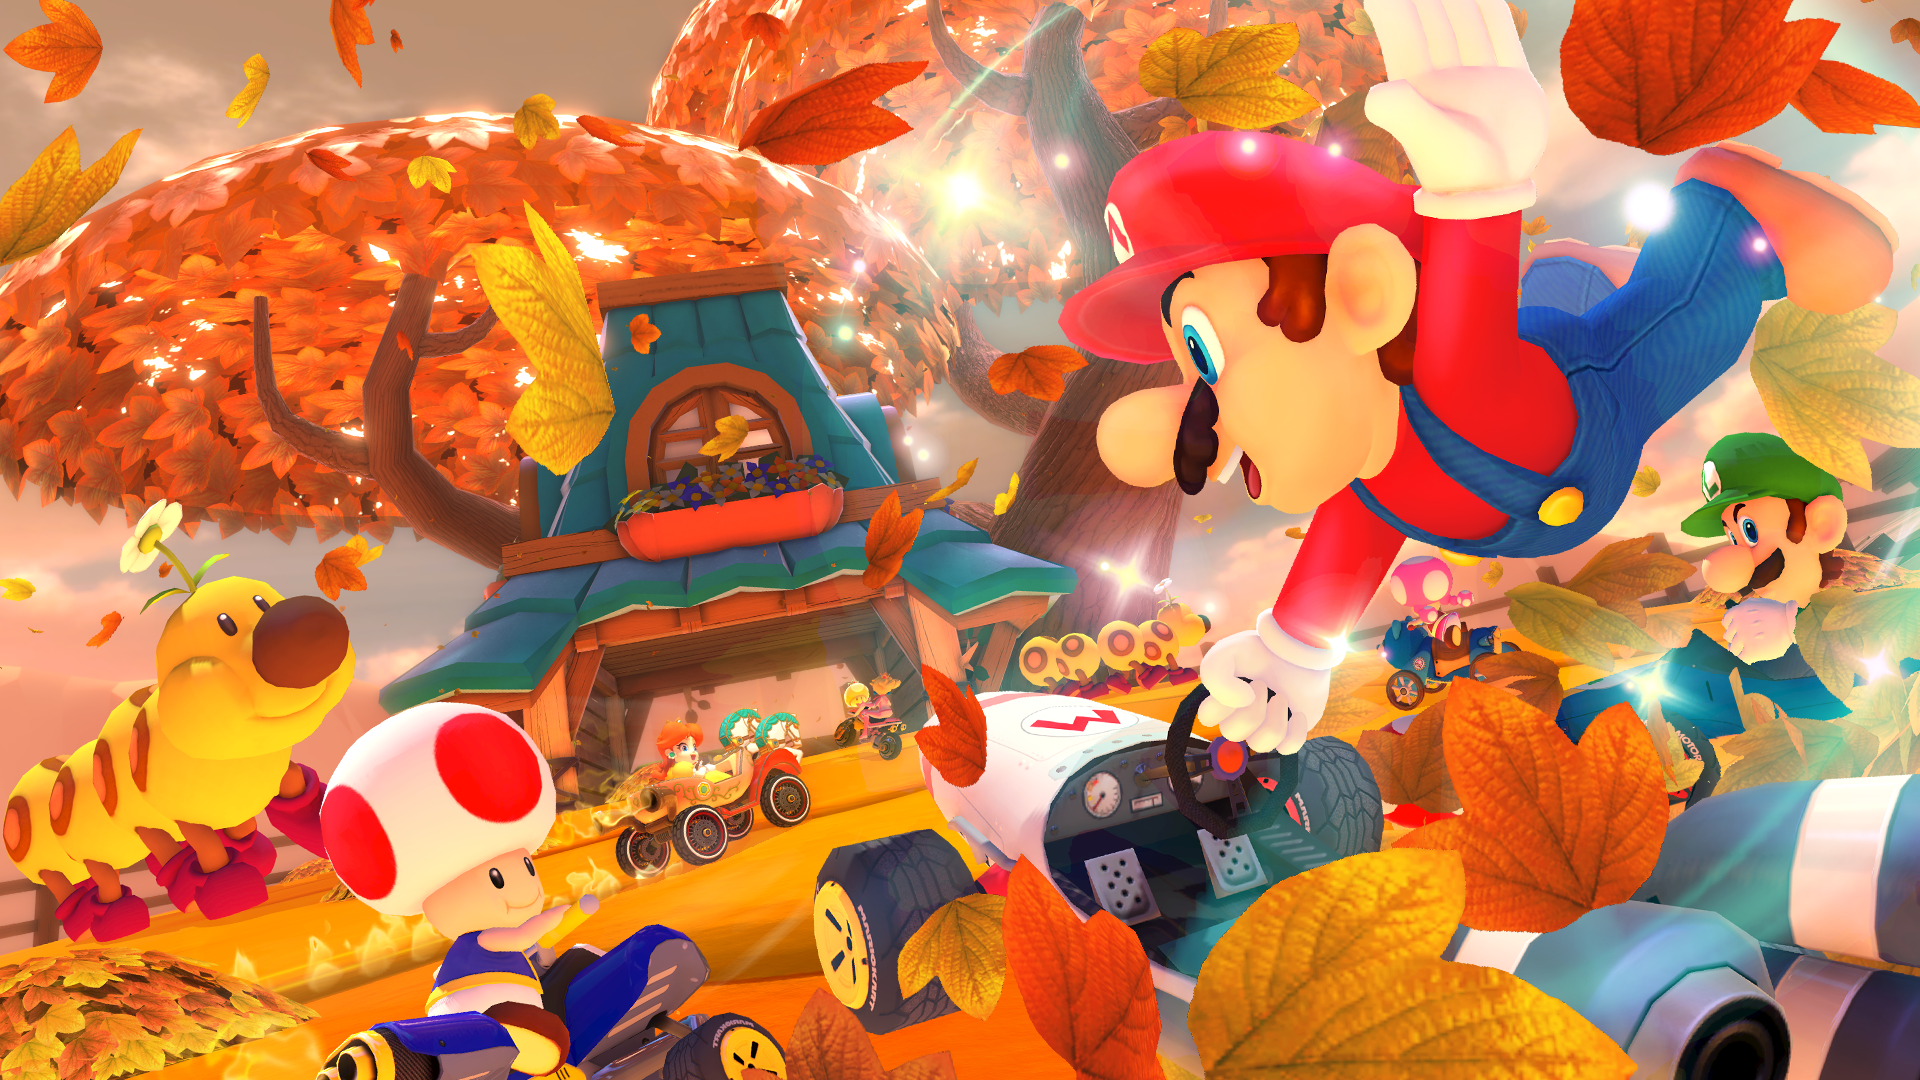 Image for Mario Kart 8 Deluxe free update adds custom item selection